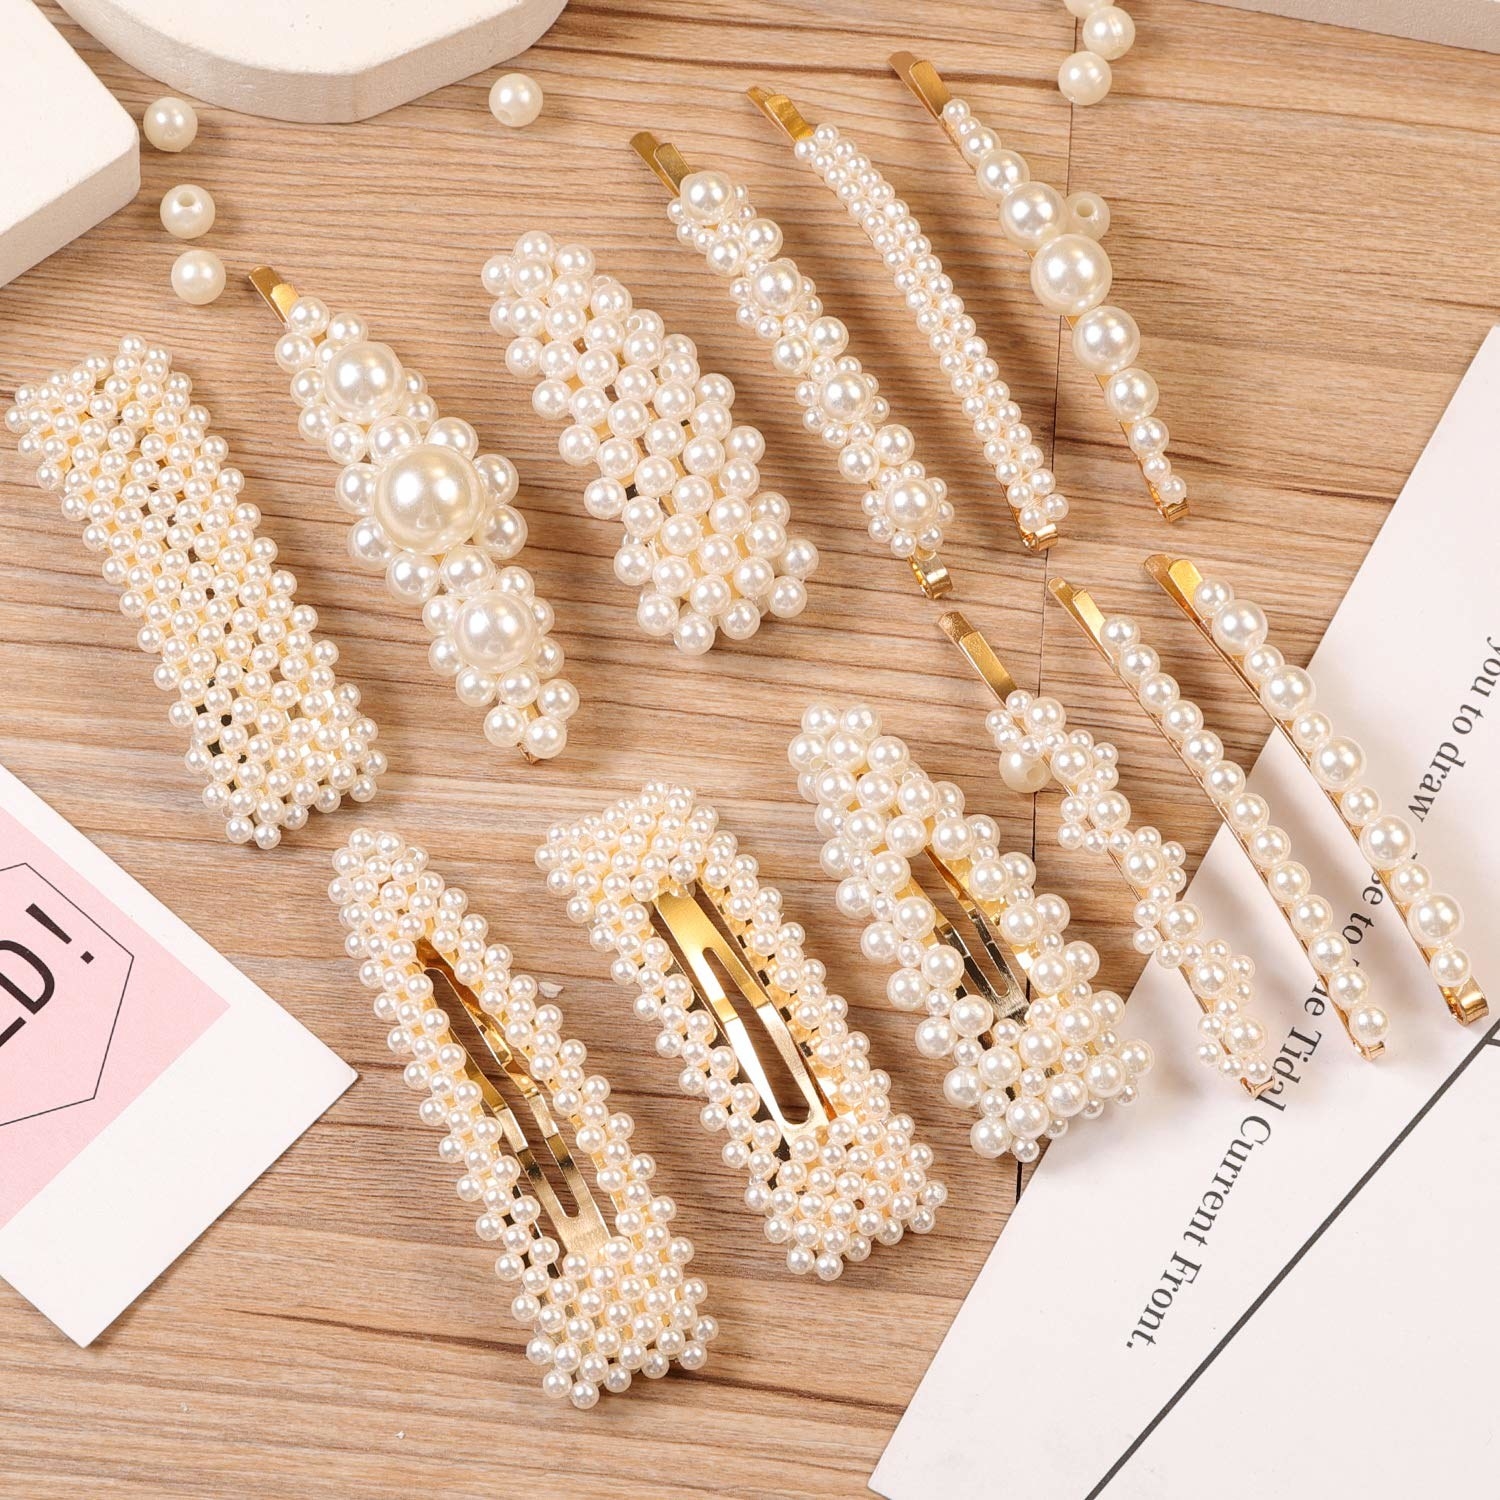 The pack of pearl and gold slides and clips